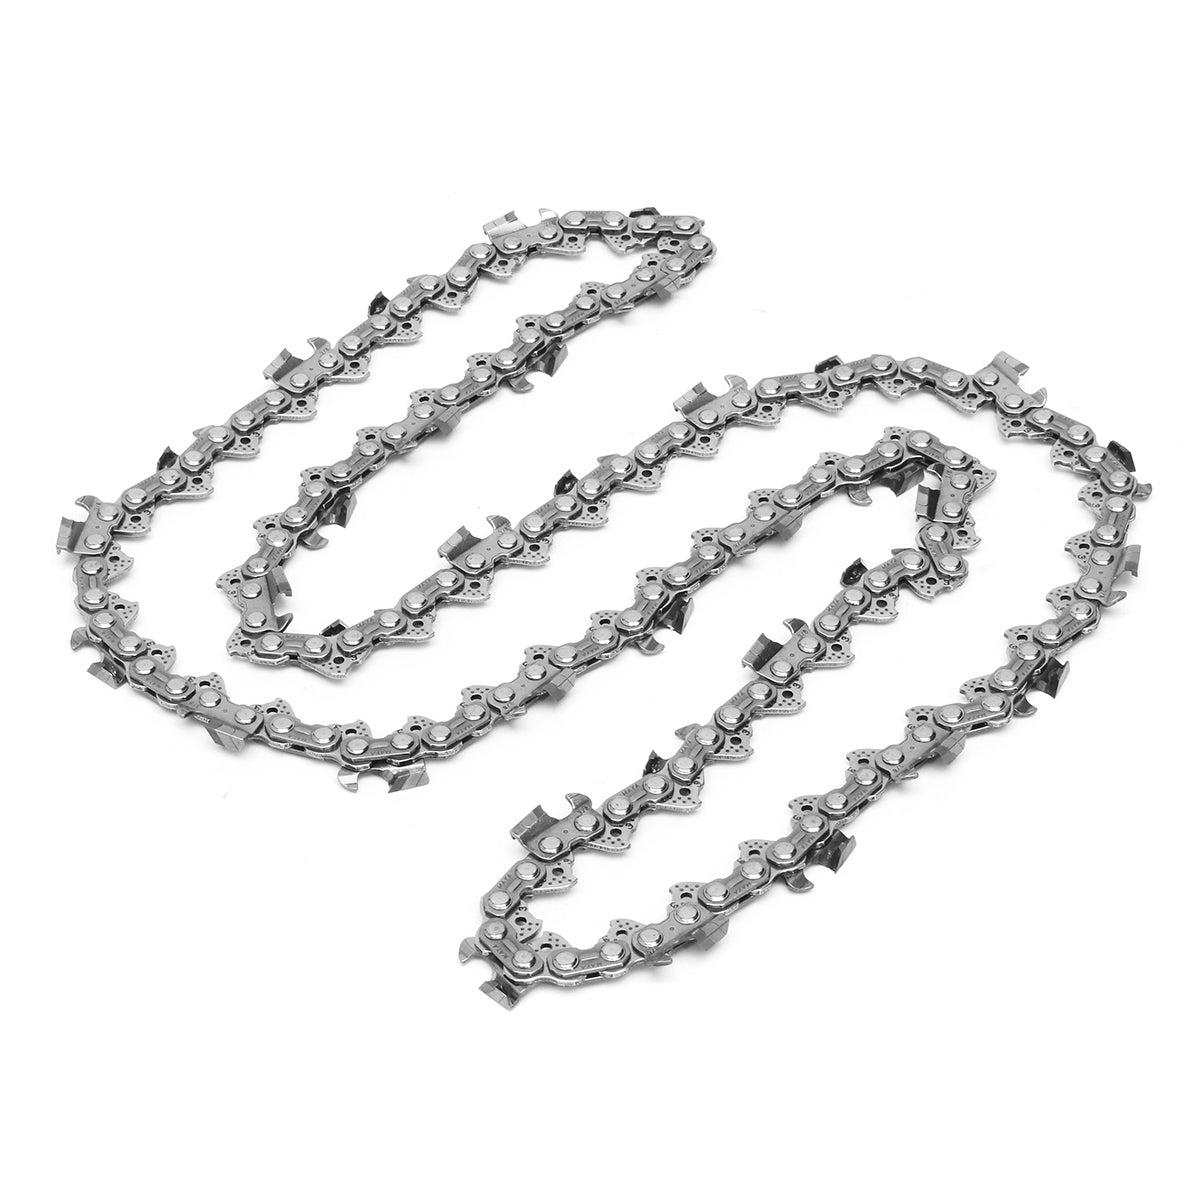 Carbide Tipped Saw Chain 72 Drive Links Chain For 20 Inch 33R-72 Chainsaw